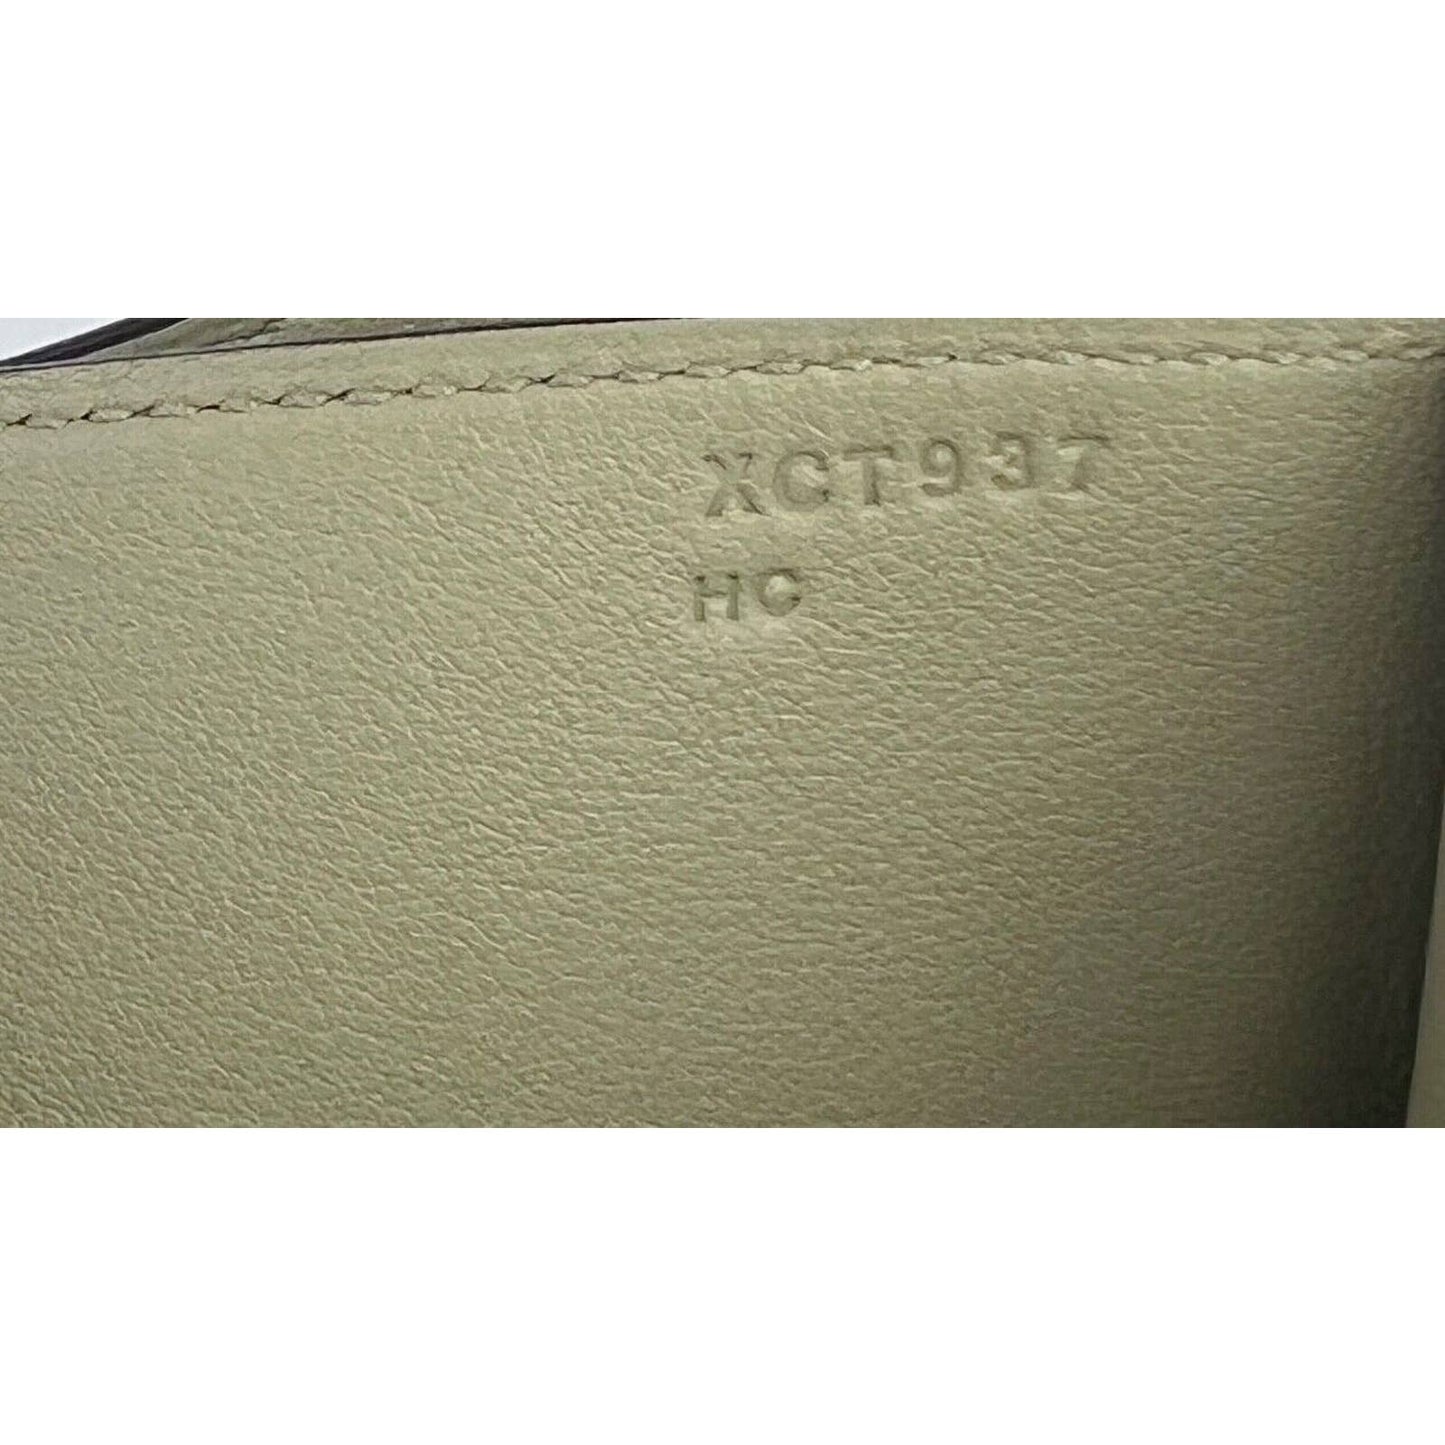 HERMES Constance 24 Sauge Gray Green Leather Gold Hardware